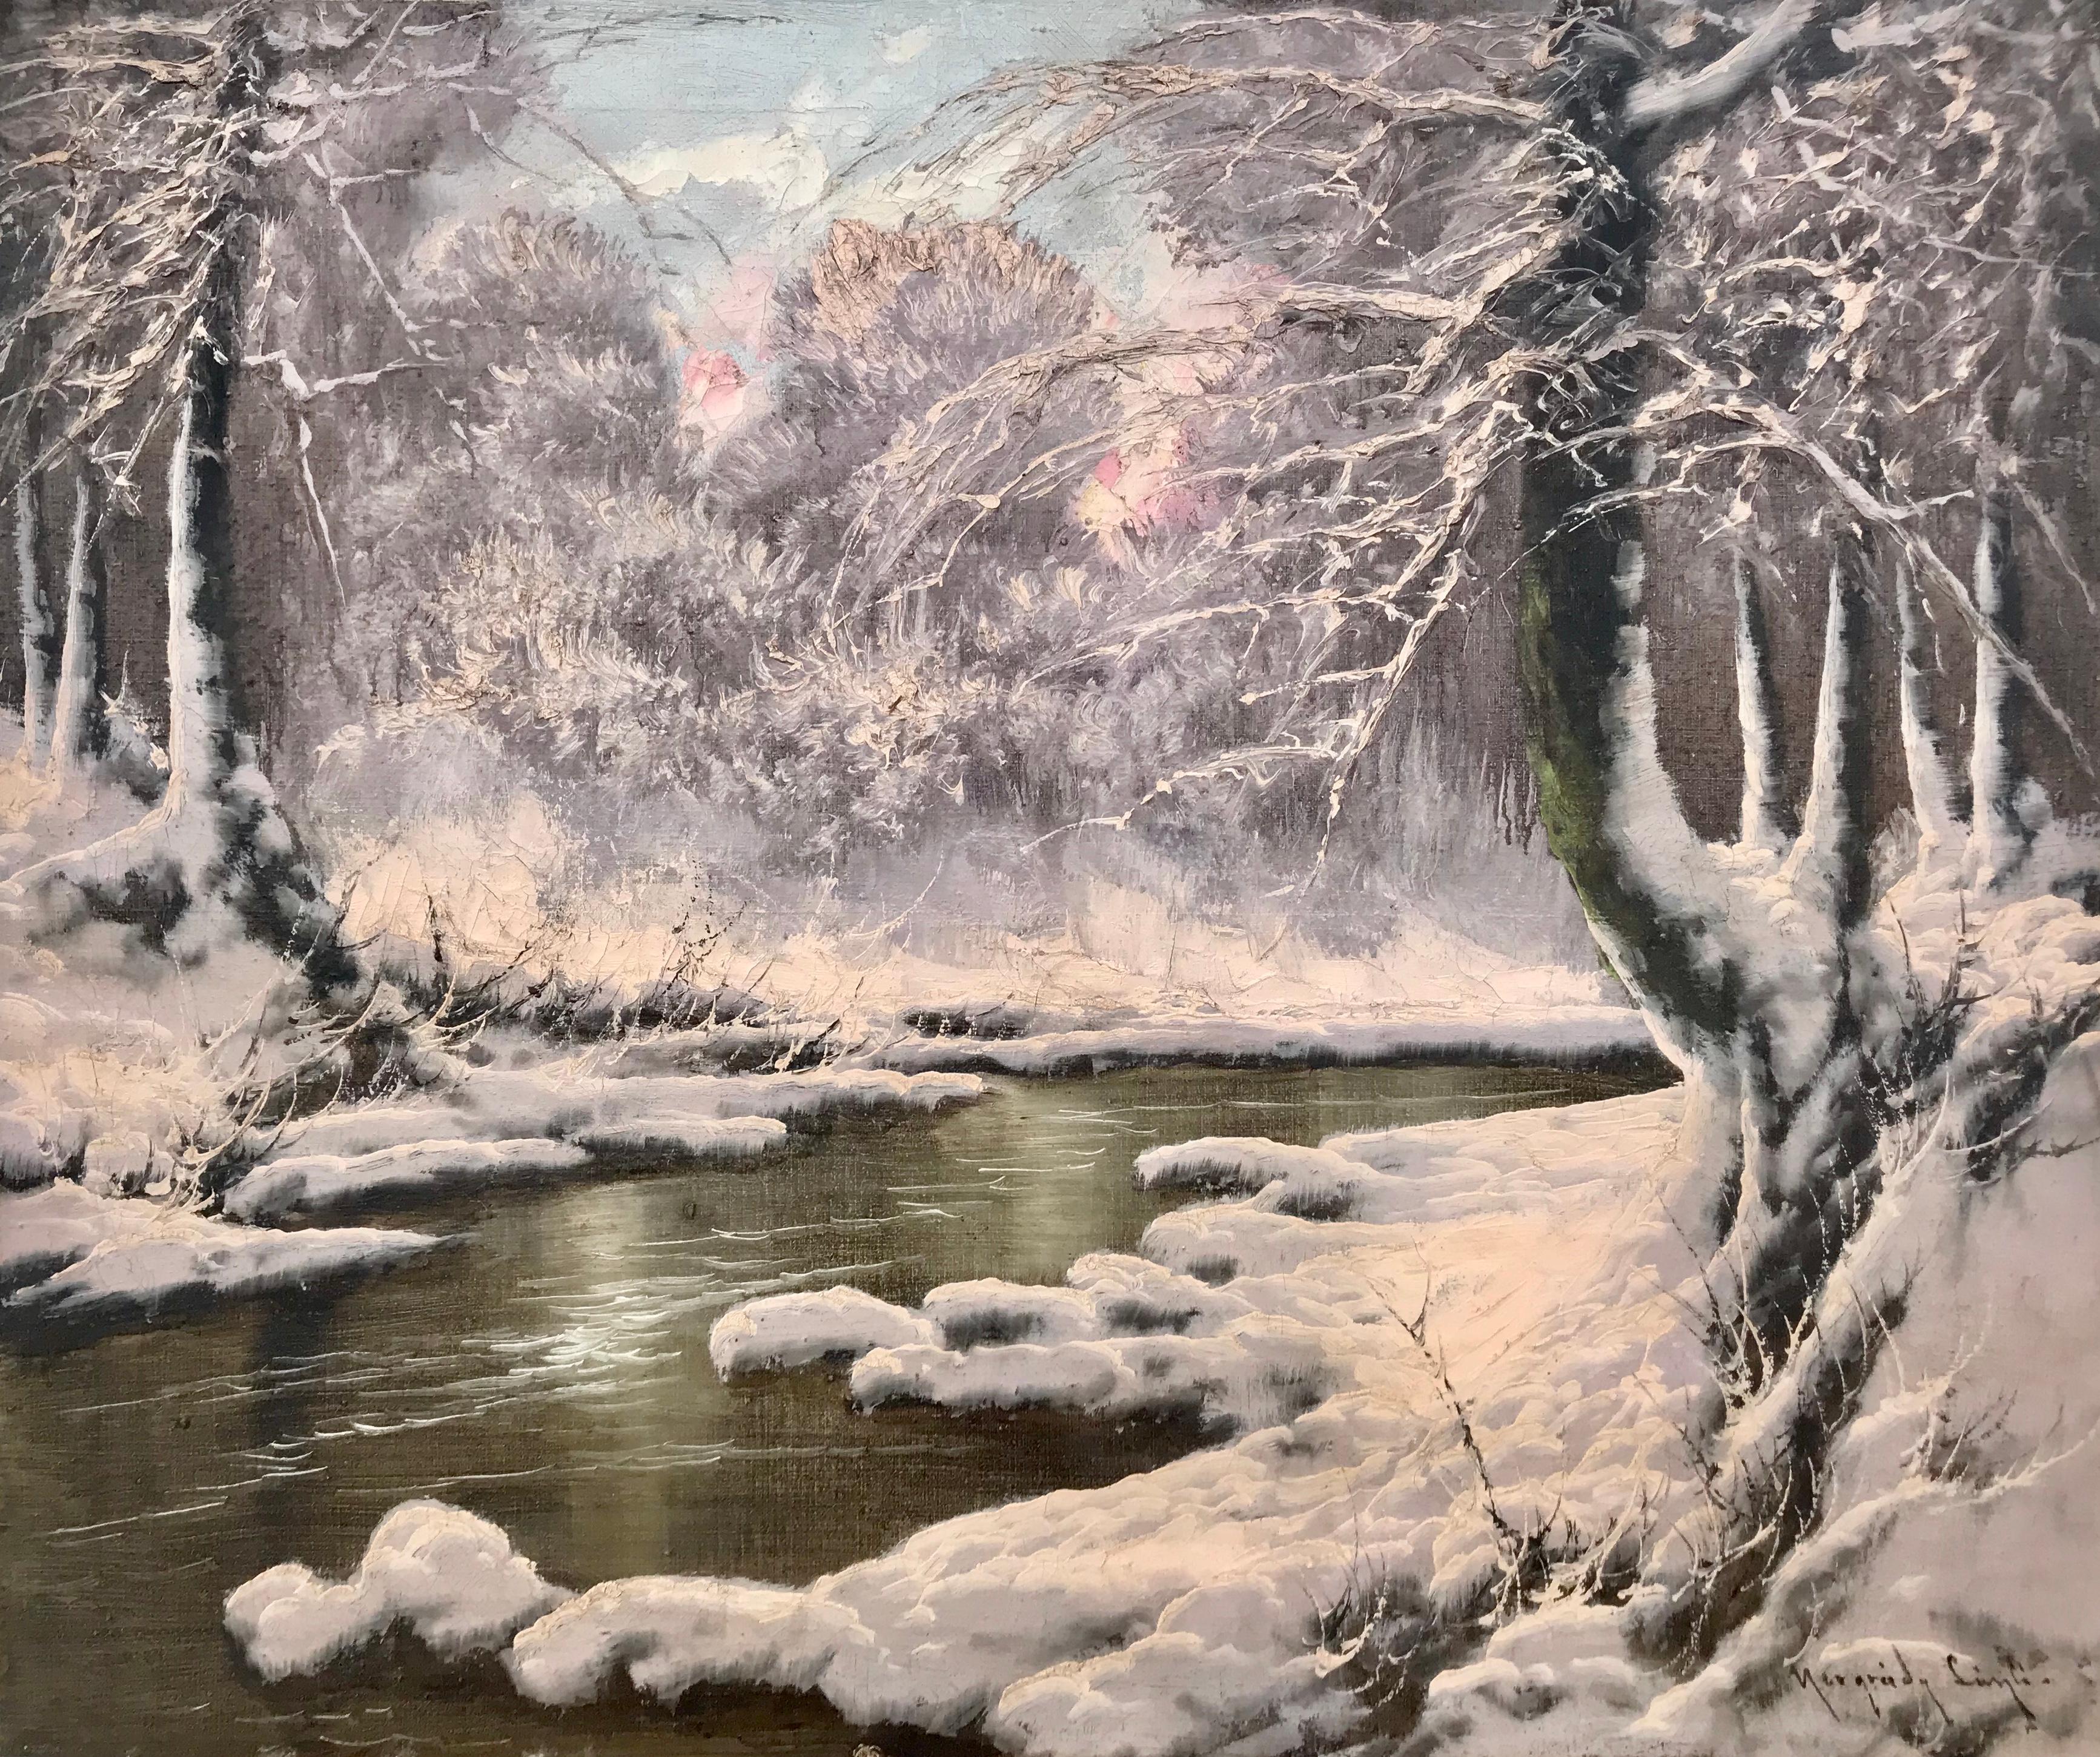 Early 20th Century Painting of a Hungarian Winter Wonderland Forest River Snow Scene.

Art measures 23.5 x 19.5 inches
Frame measures 30 x 26 inches

Laszlo Neogrady was a Hungarian painter best known for his naturalistic depictions of rustic